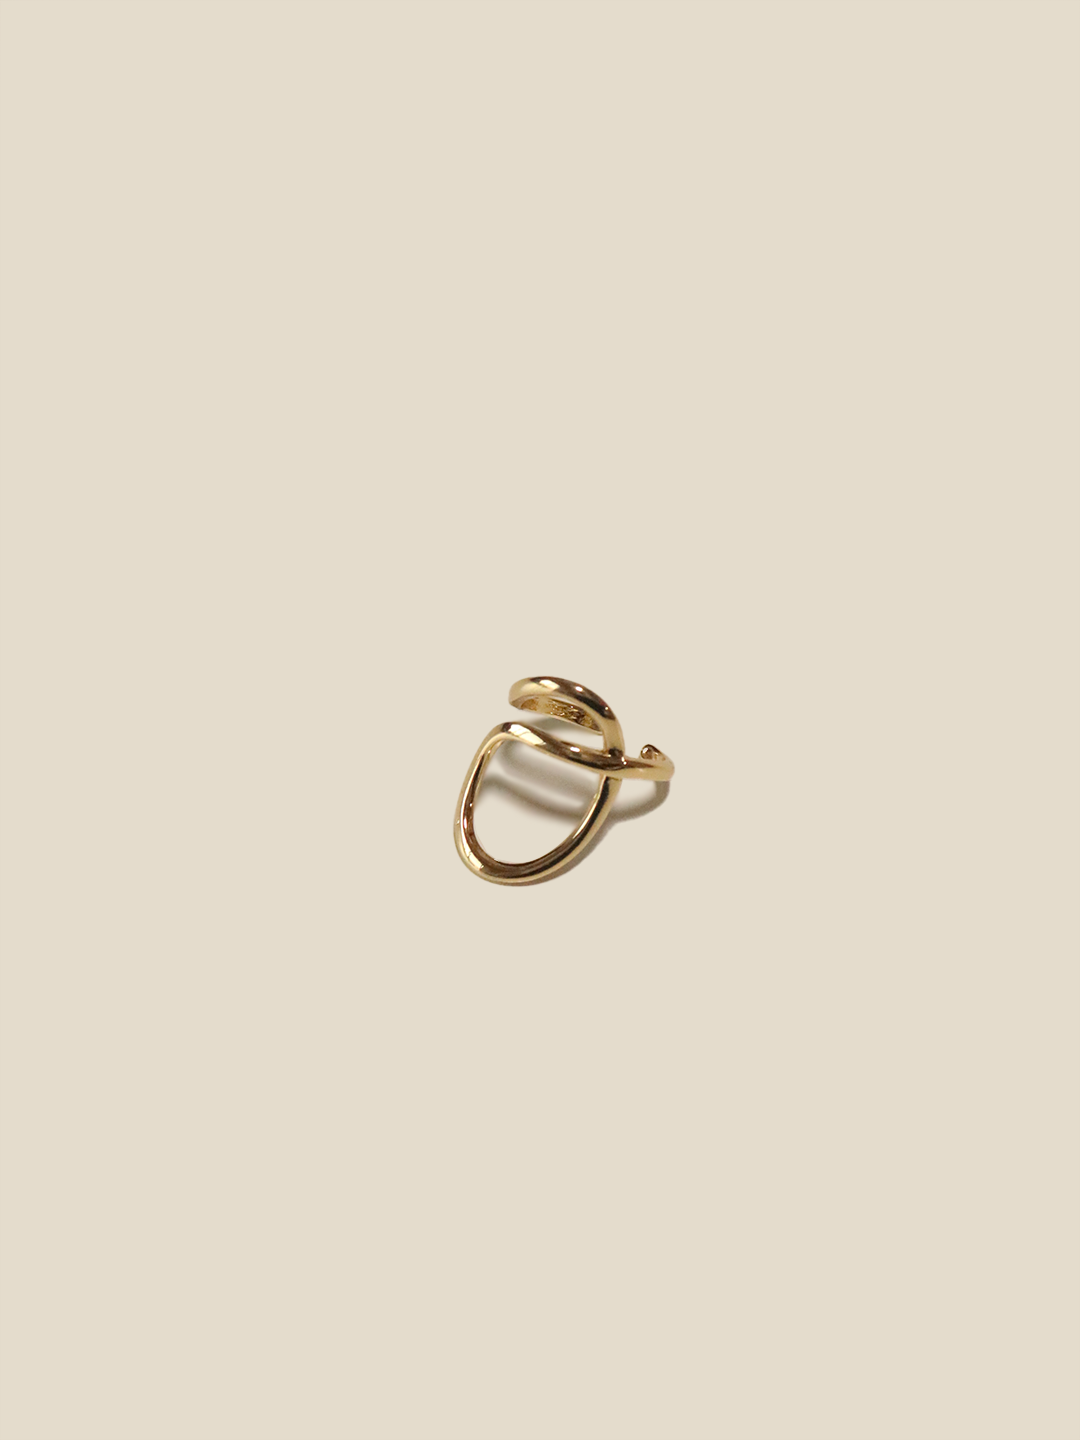 Remarque ring